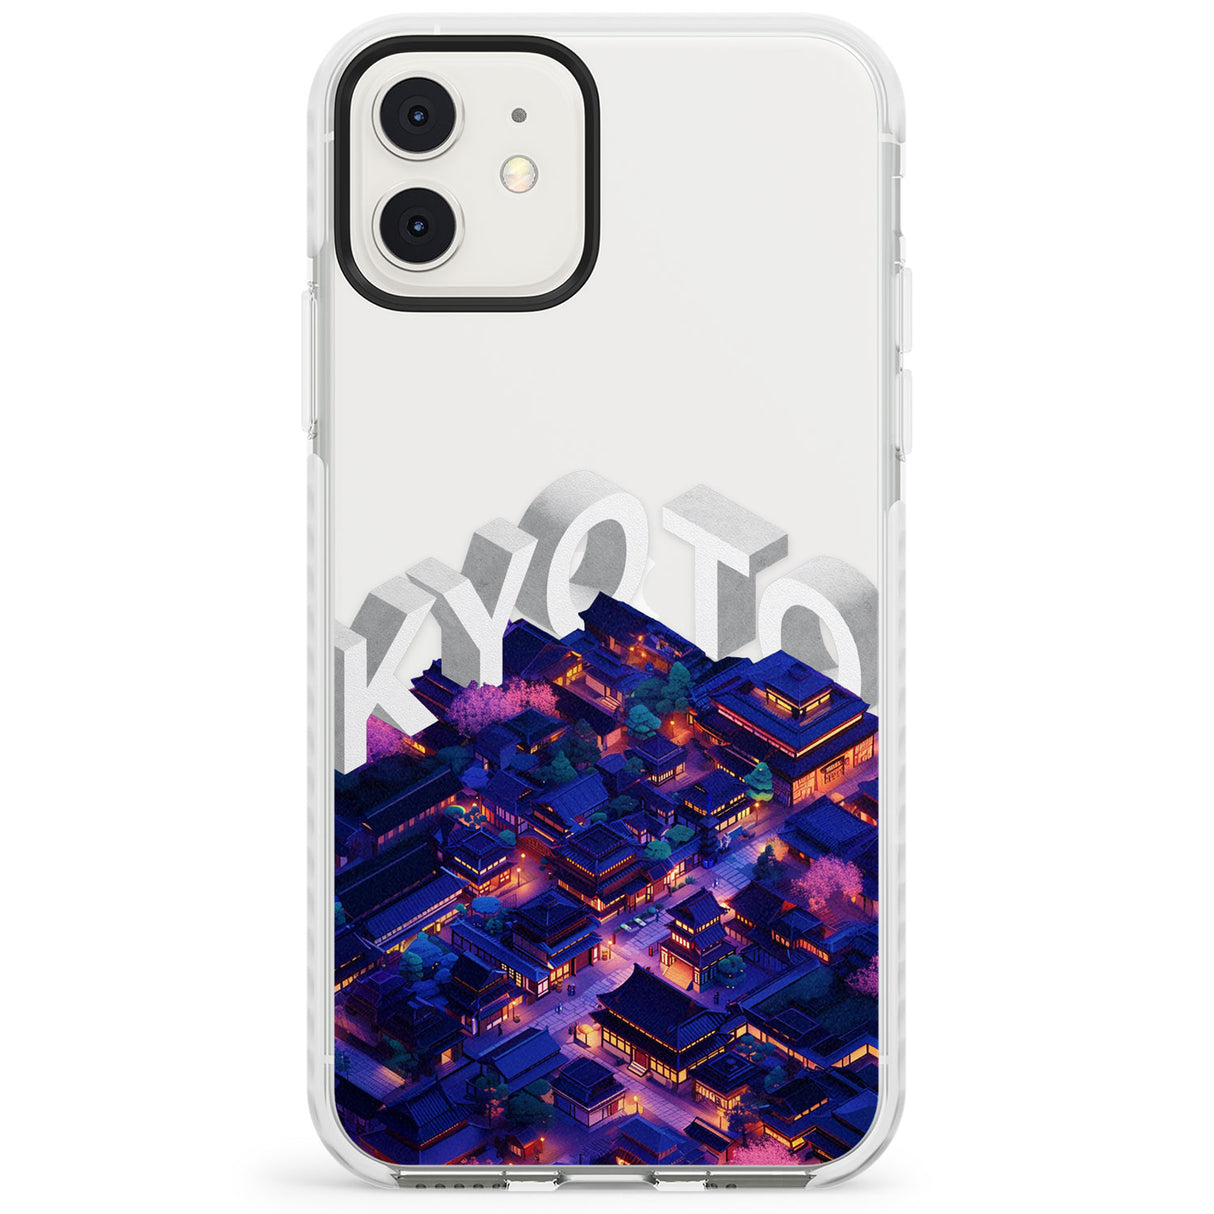 Kyoto Impact Phone Case for iPhone 11, iphone 12